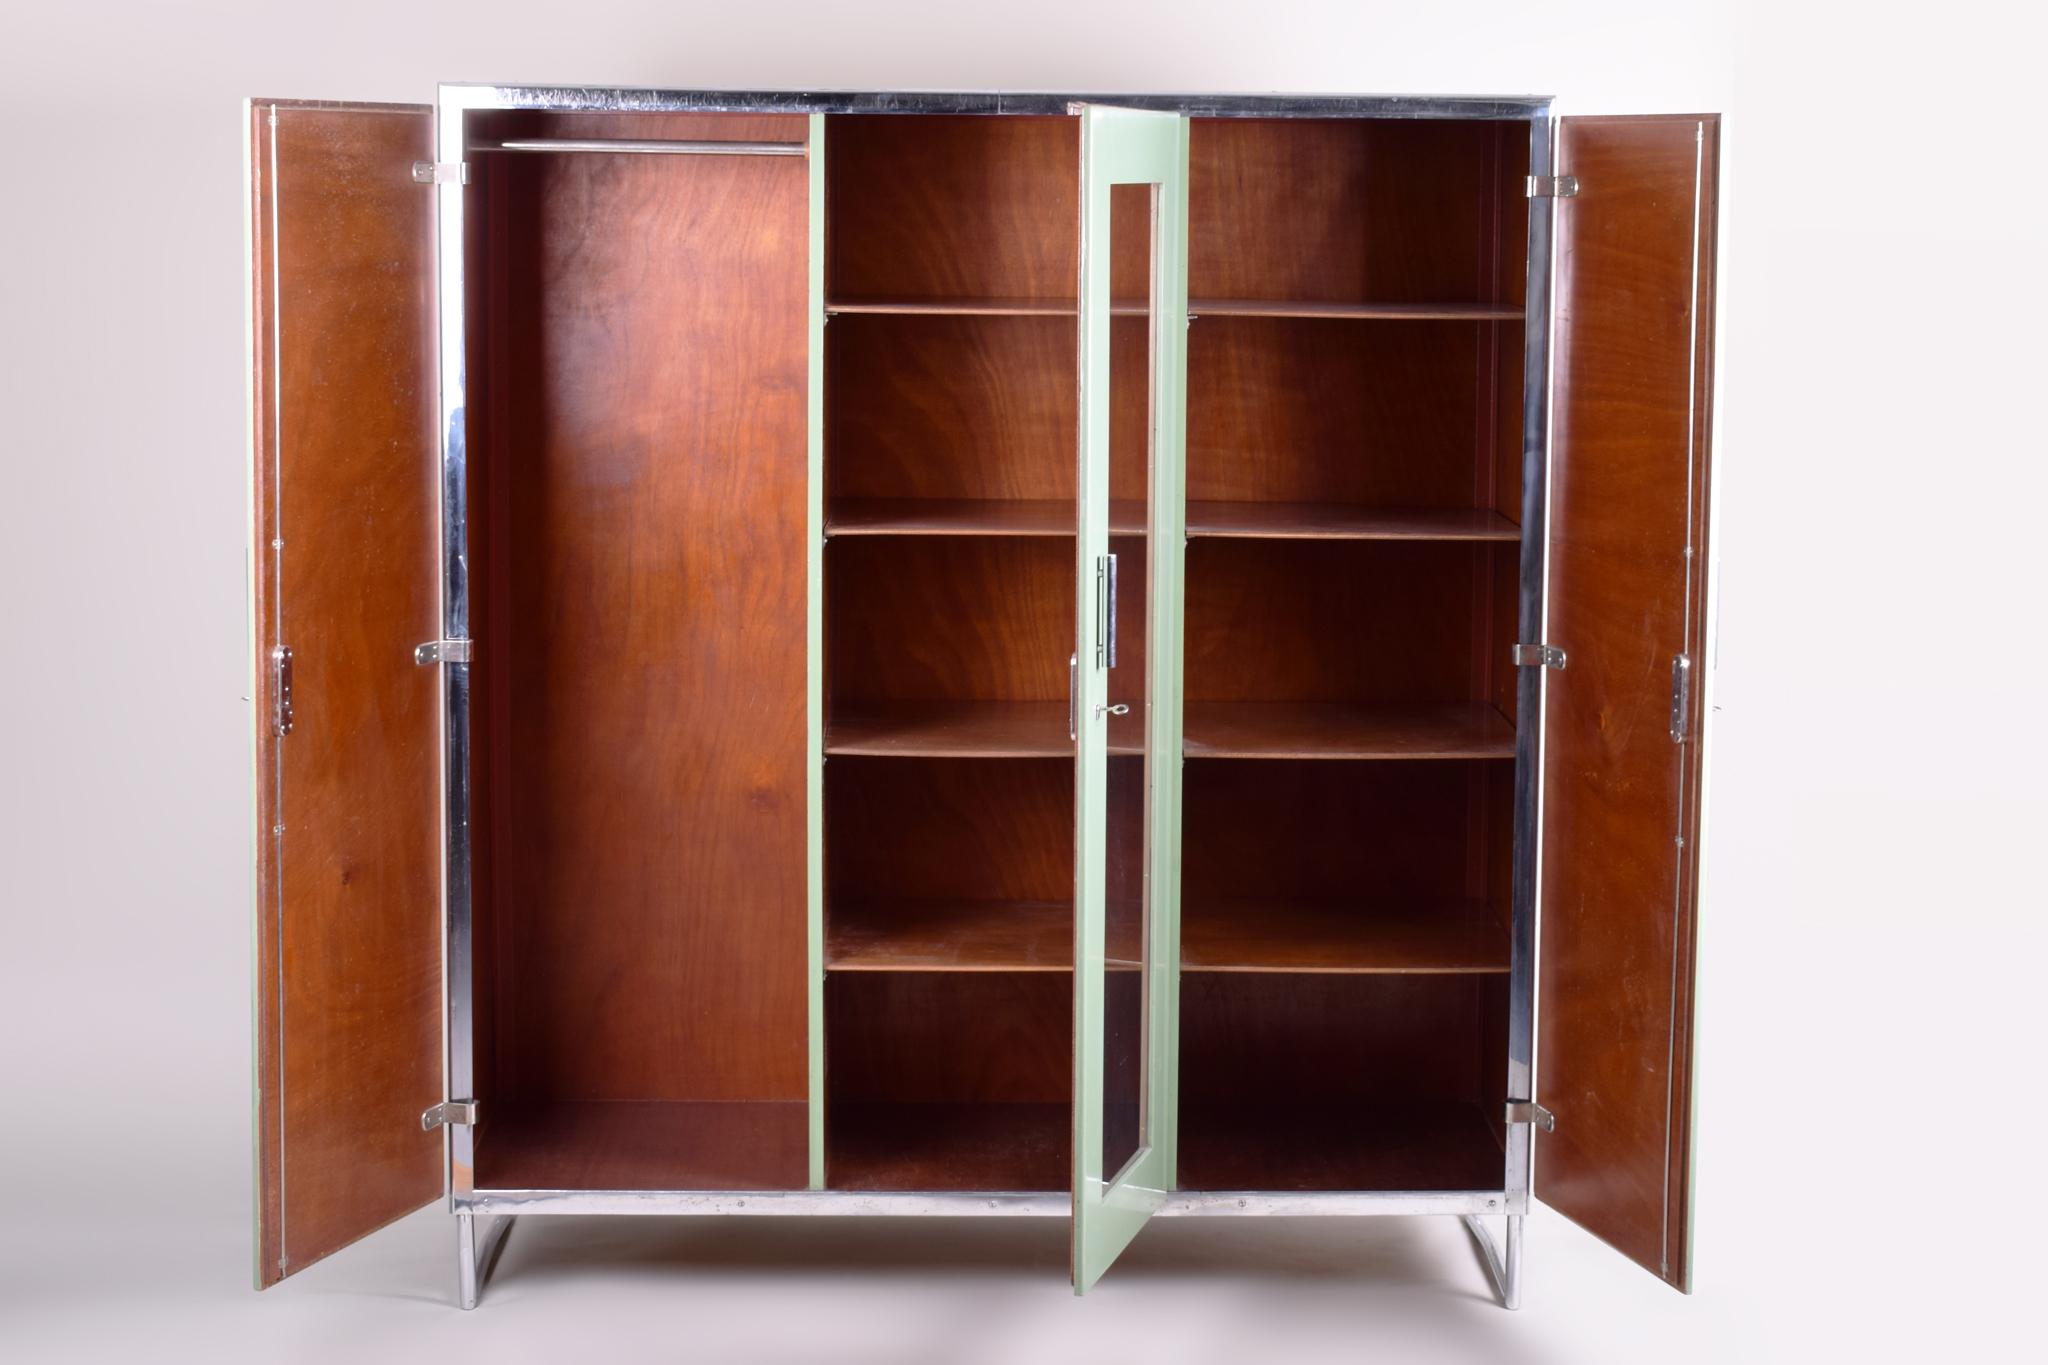 This original Bauhaus cabinet manufactured by Mücke-Melder is a perfect representation of the simplistic elegance of the Bauhaus Era.

This perfect example of Czech Bauhaus style was produced by Mücke-Melder which hails from a weighty midcentury